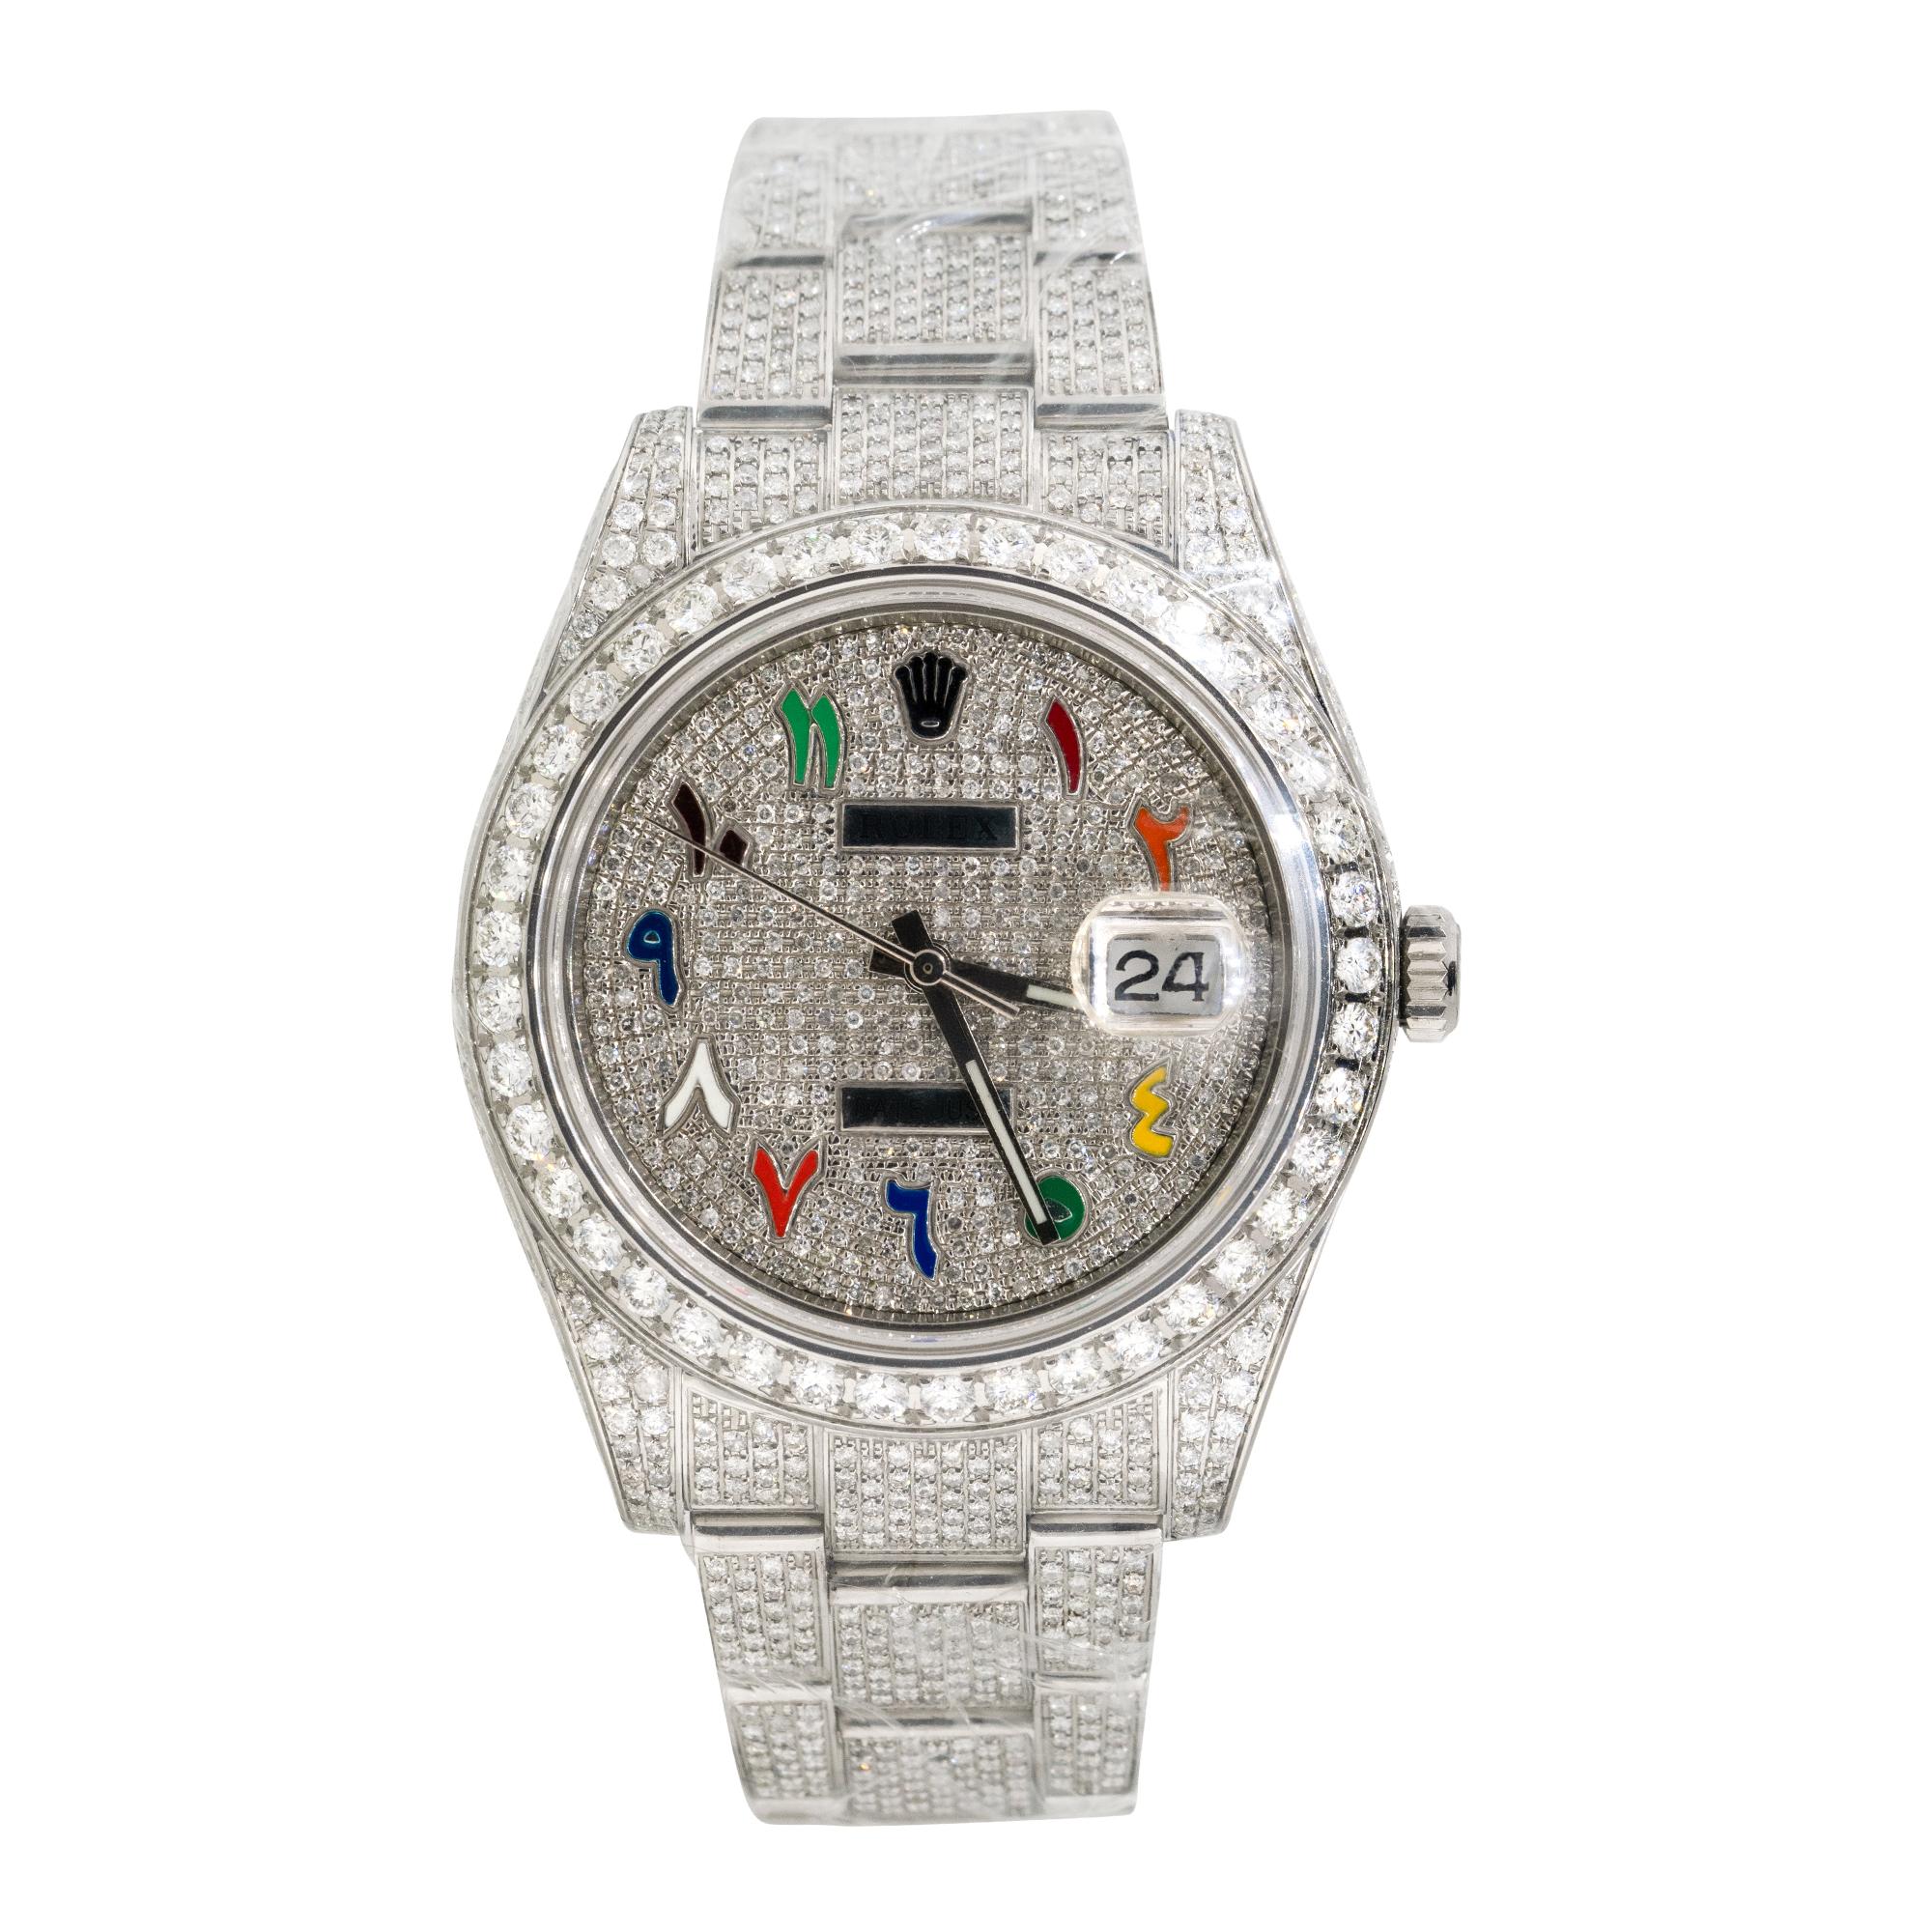 Brand: Rolex
MPN: 116300
Model: Datejust II
Case Material: Stainless steel with aftermarket Diamonds
Case Diameter: 41mm
Crystal: Sapphire Crystal
Bezel: Stainless steel bezel with aftermarket Diamonds
Dial: Dial with colorful Arabic numerals